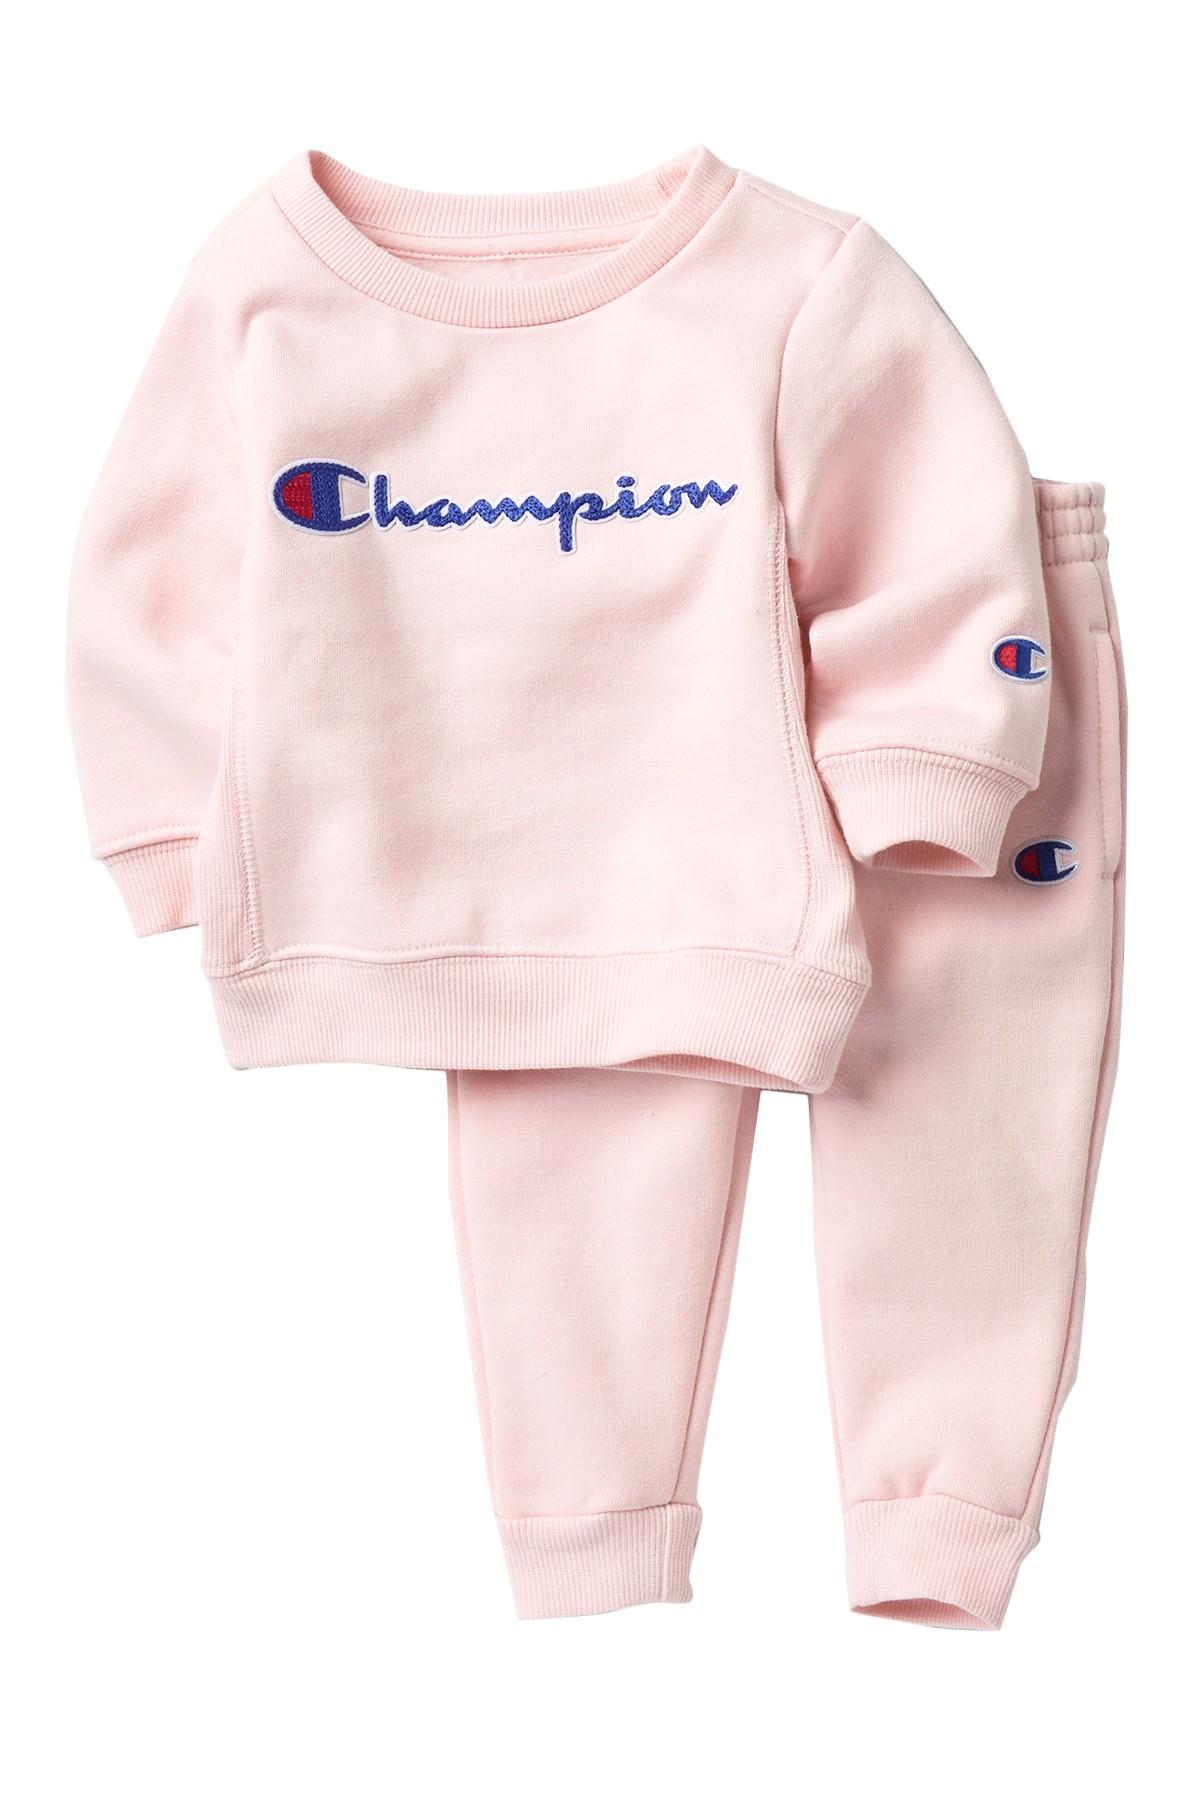 champion baby clothes girl